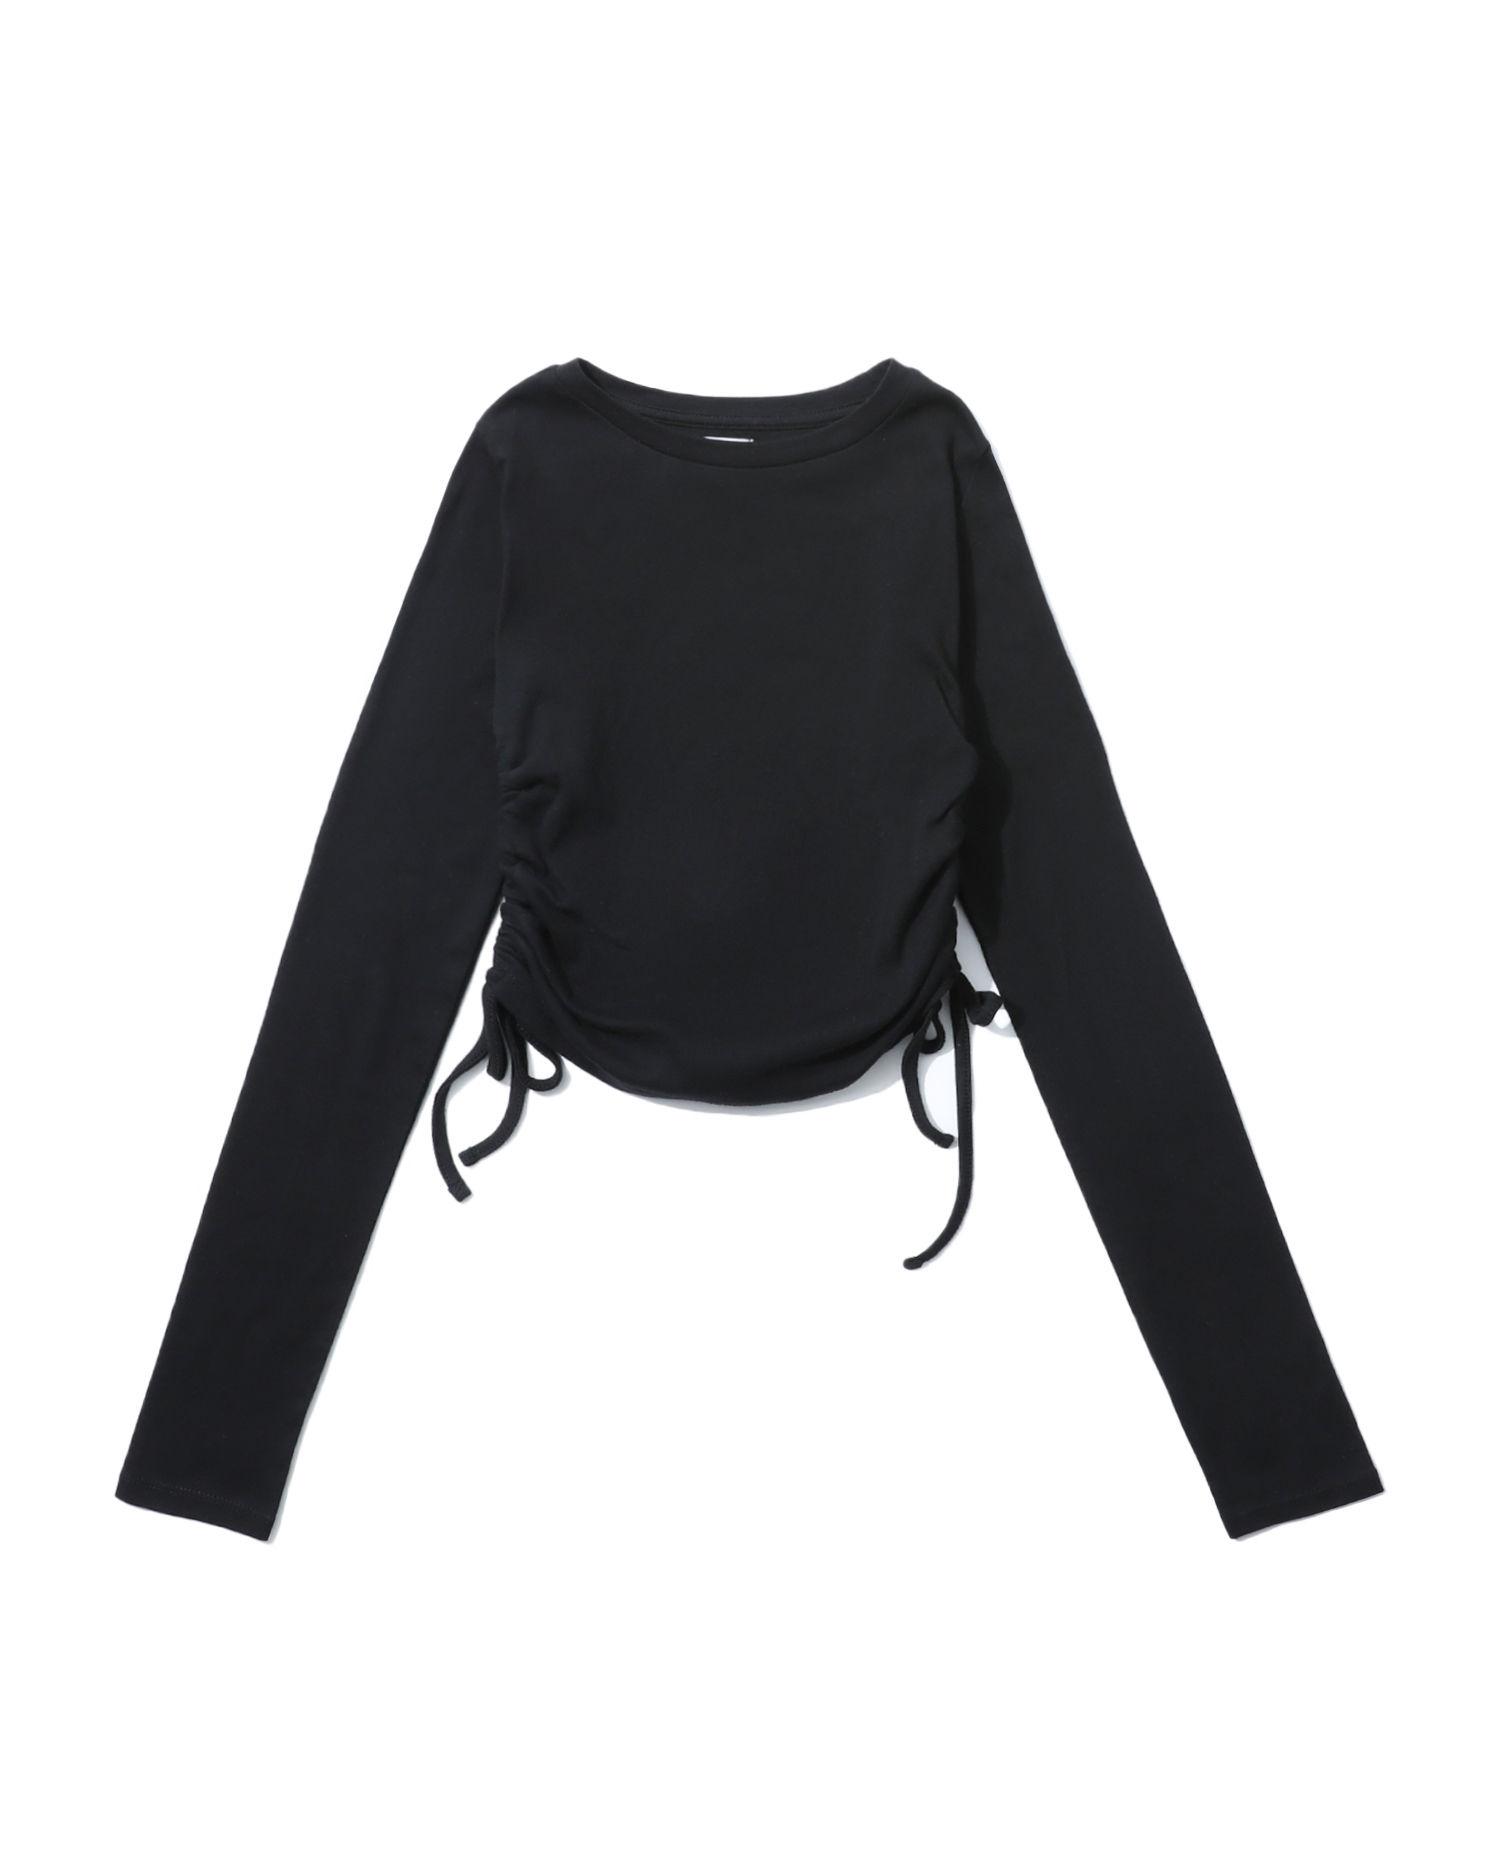 Ruched long sleeve tee by BDG